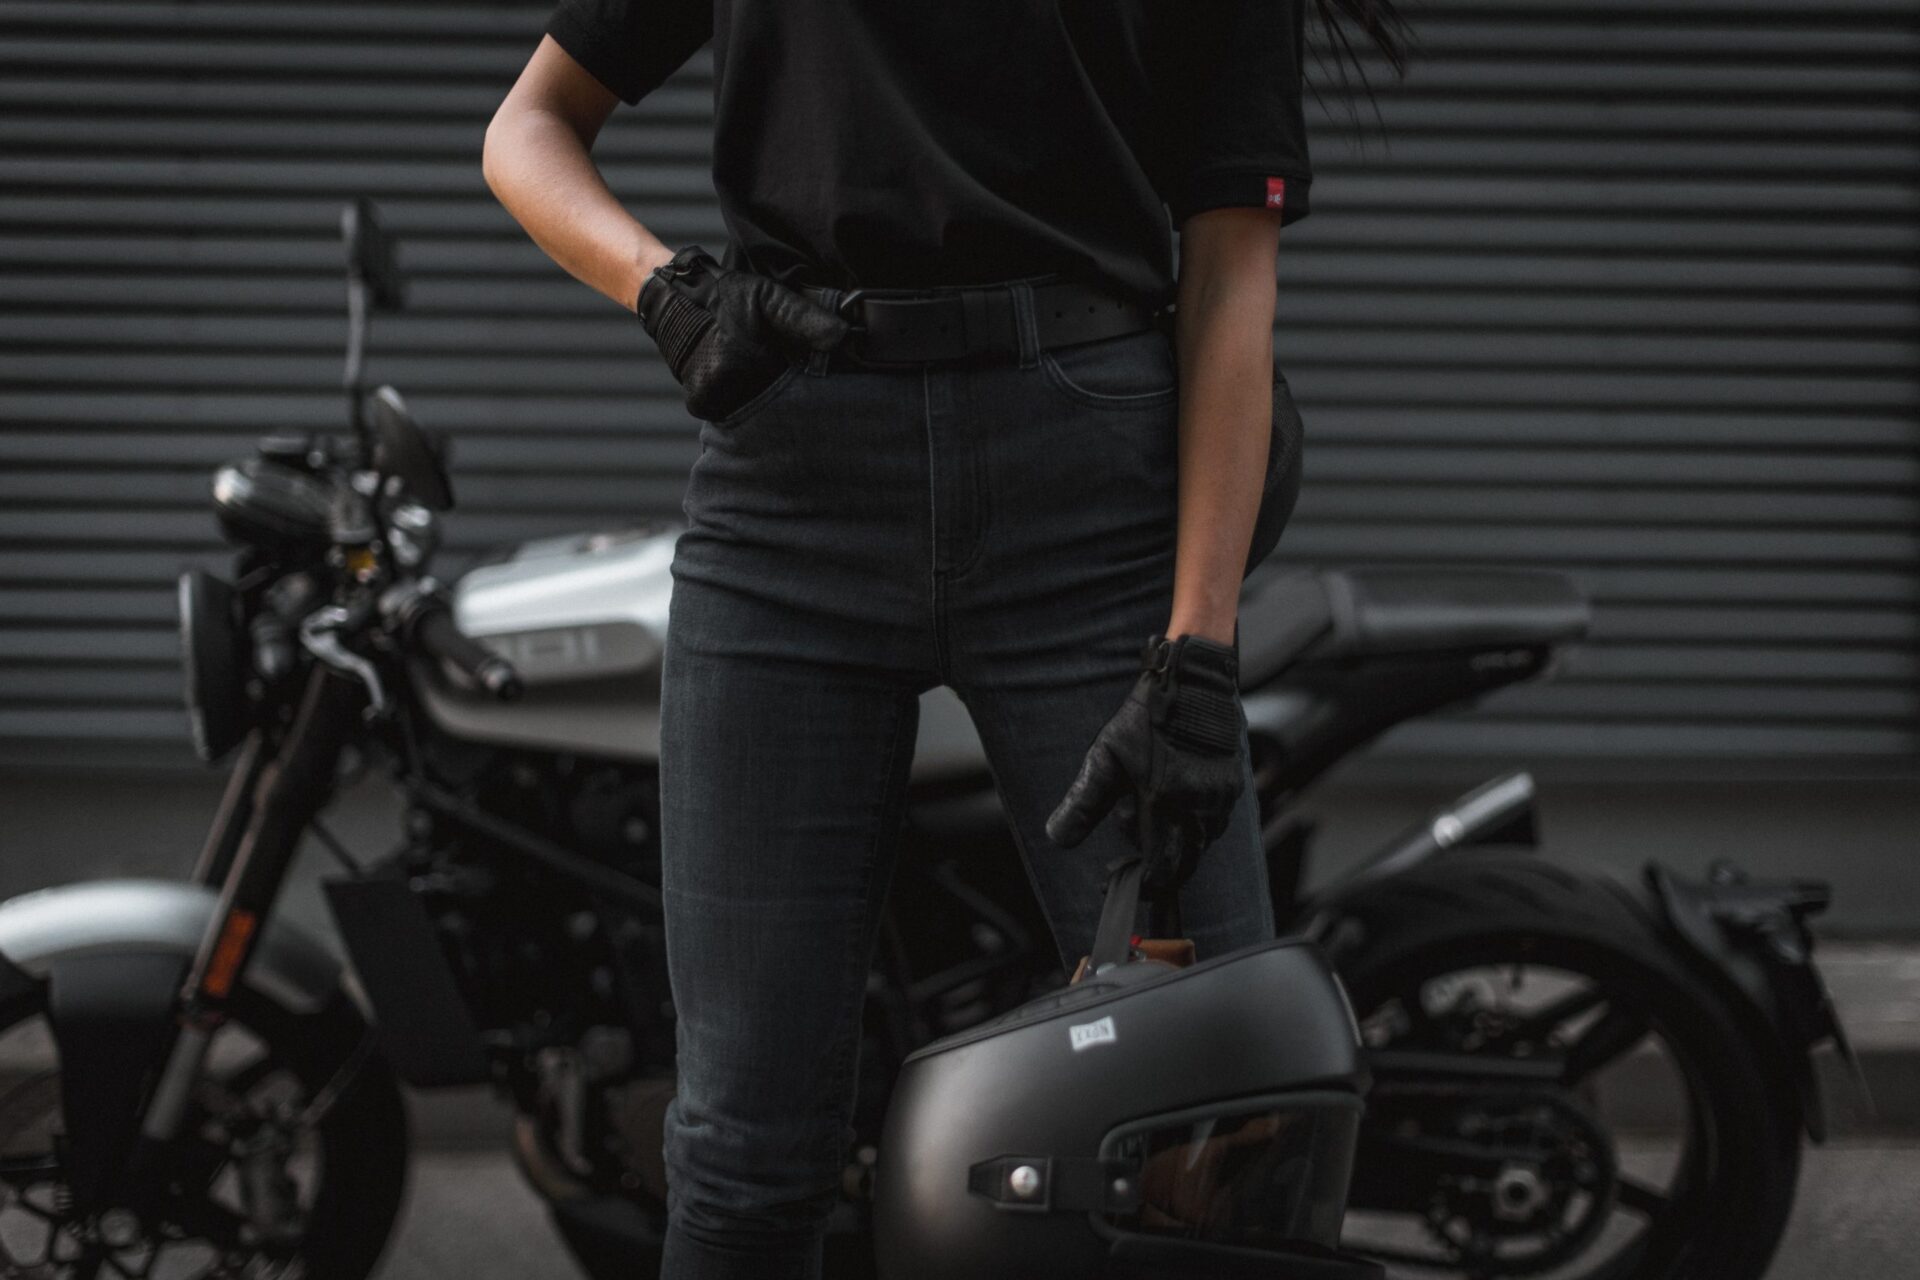 Motorcycle Pants for Women - How to Find the Right Fit?